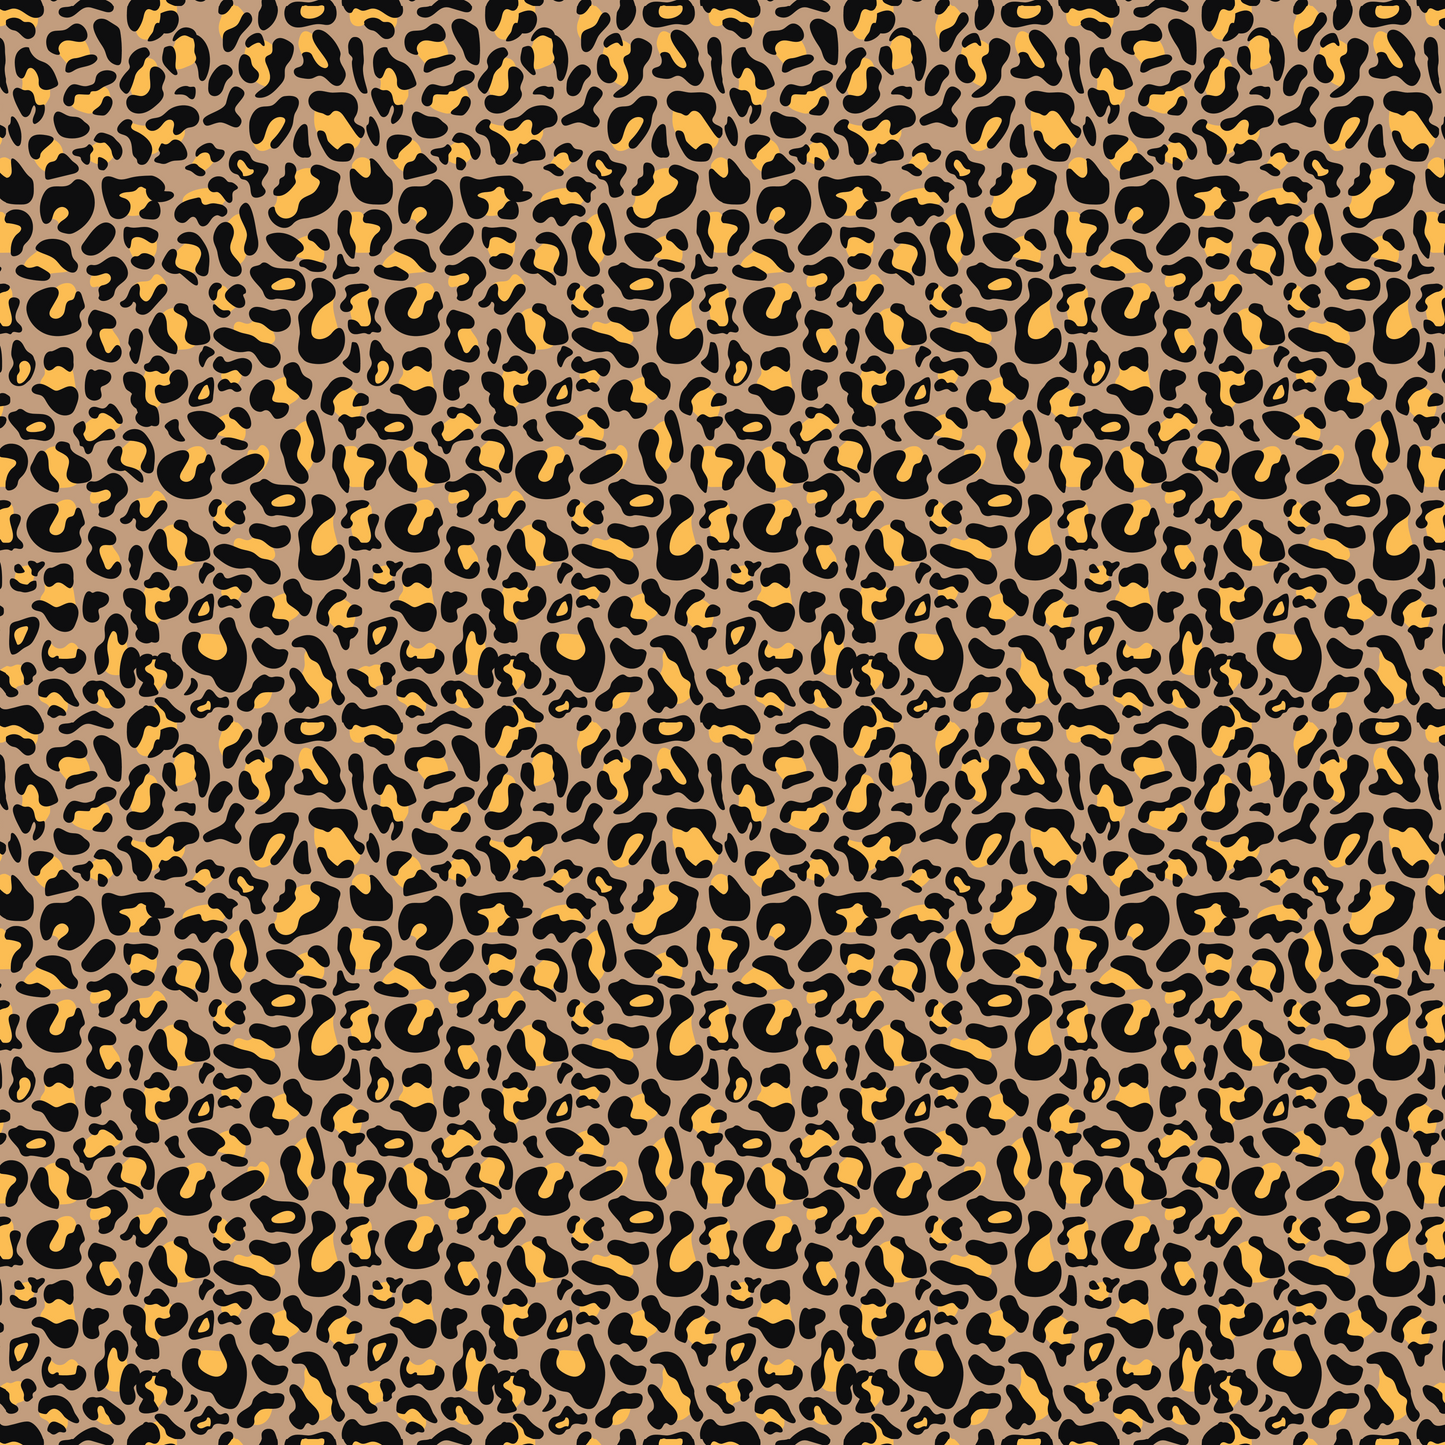 Colorful Leopard - Gold Spots on Colorful Background 007